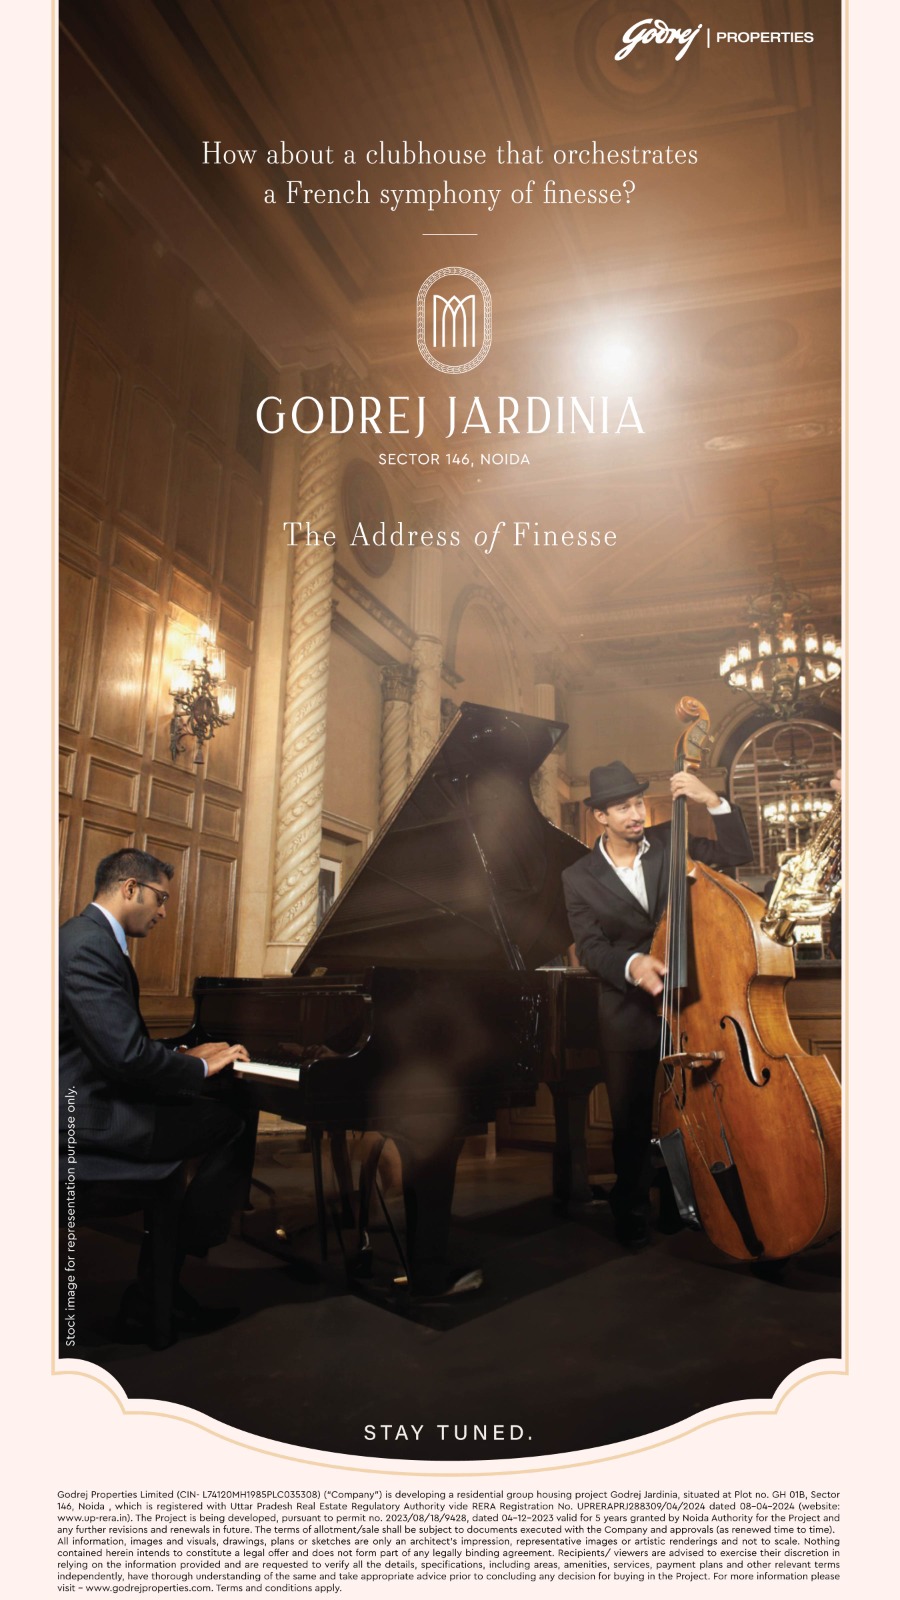 Godrej Jardinia, Sector 146, Noida: Crafting the Address of Finesse with French Elegance Update